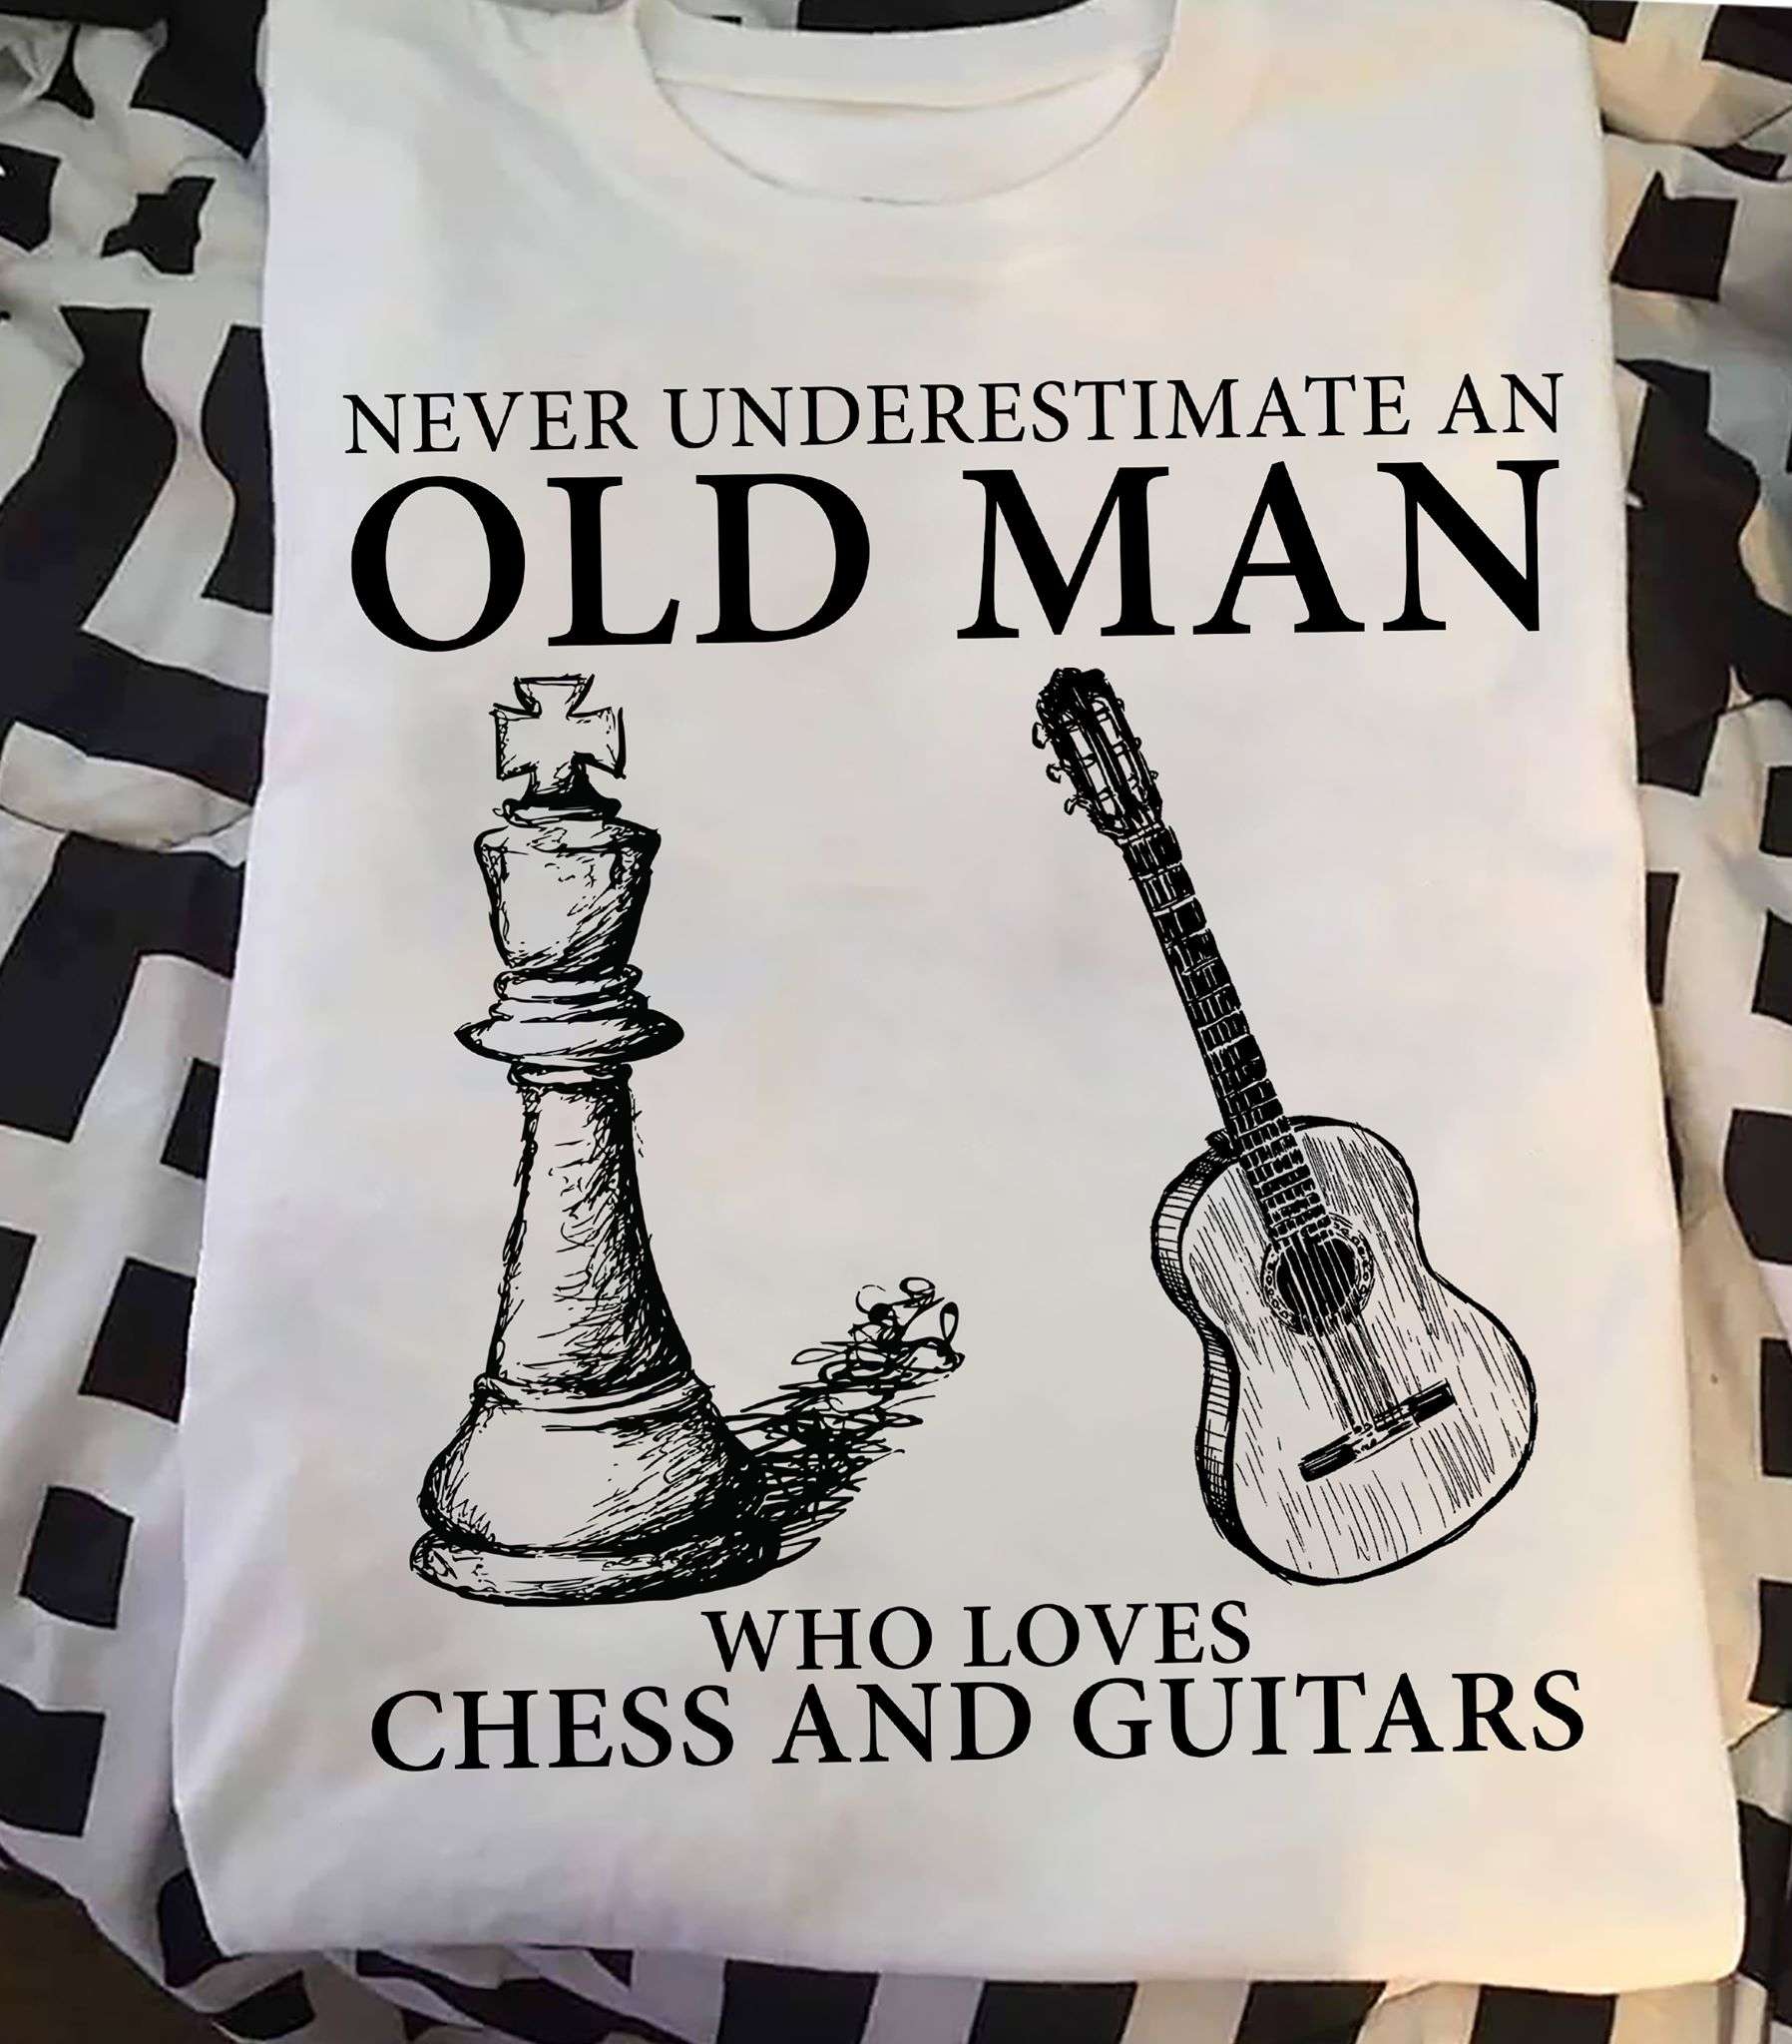 Never underestimate an old man who loves chess and guitars - Love playing chess